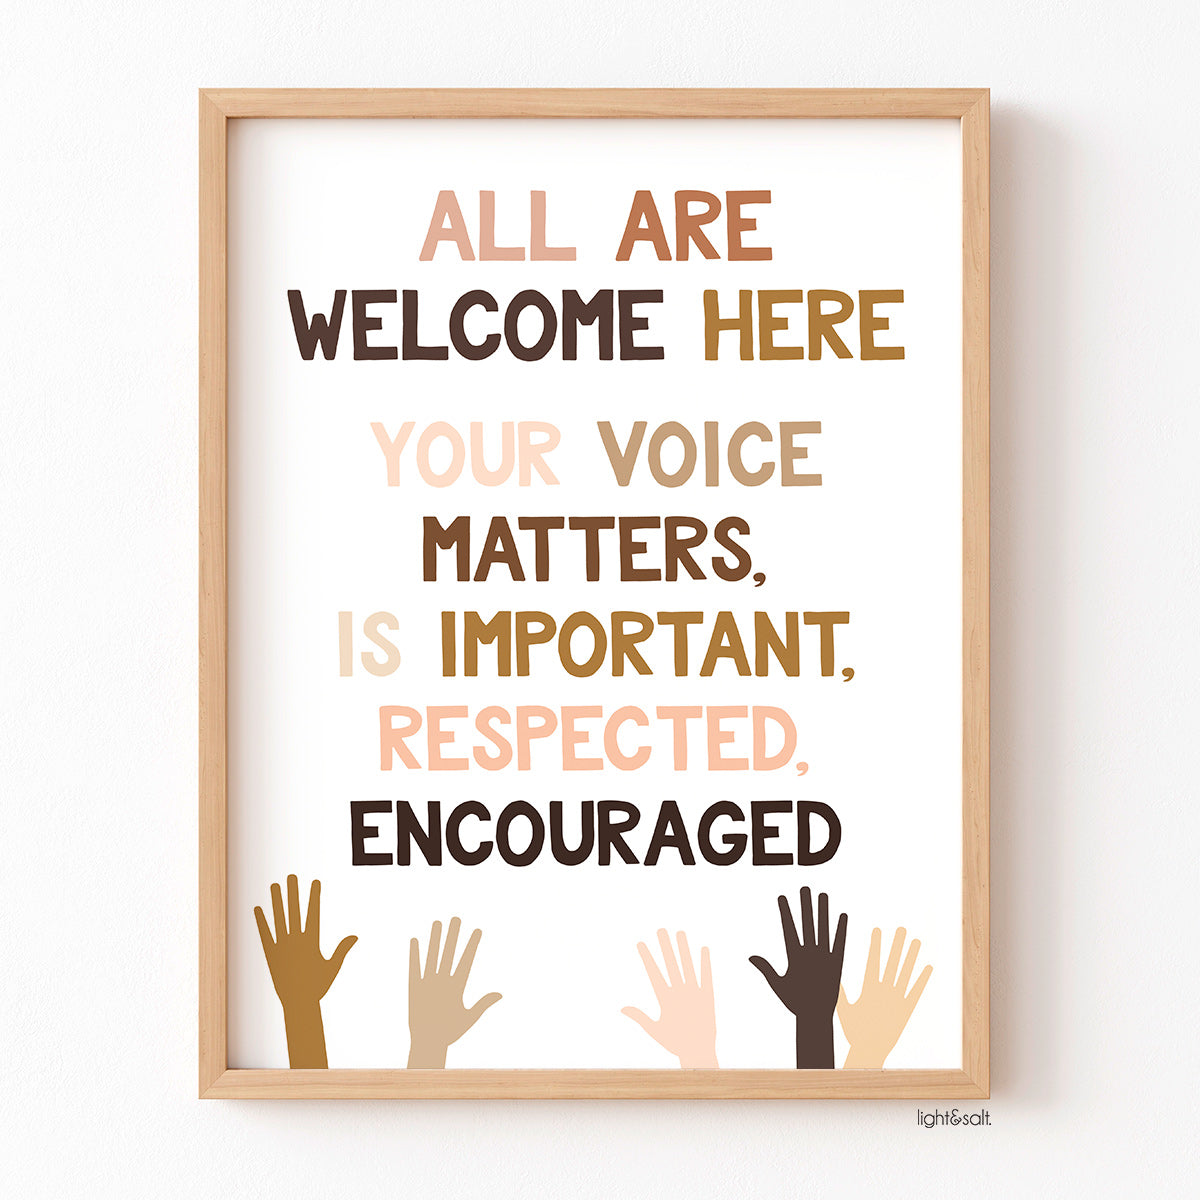 All are welcome here diversity and inclusion poster